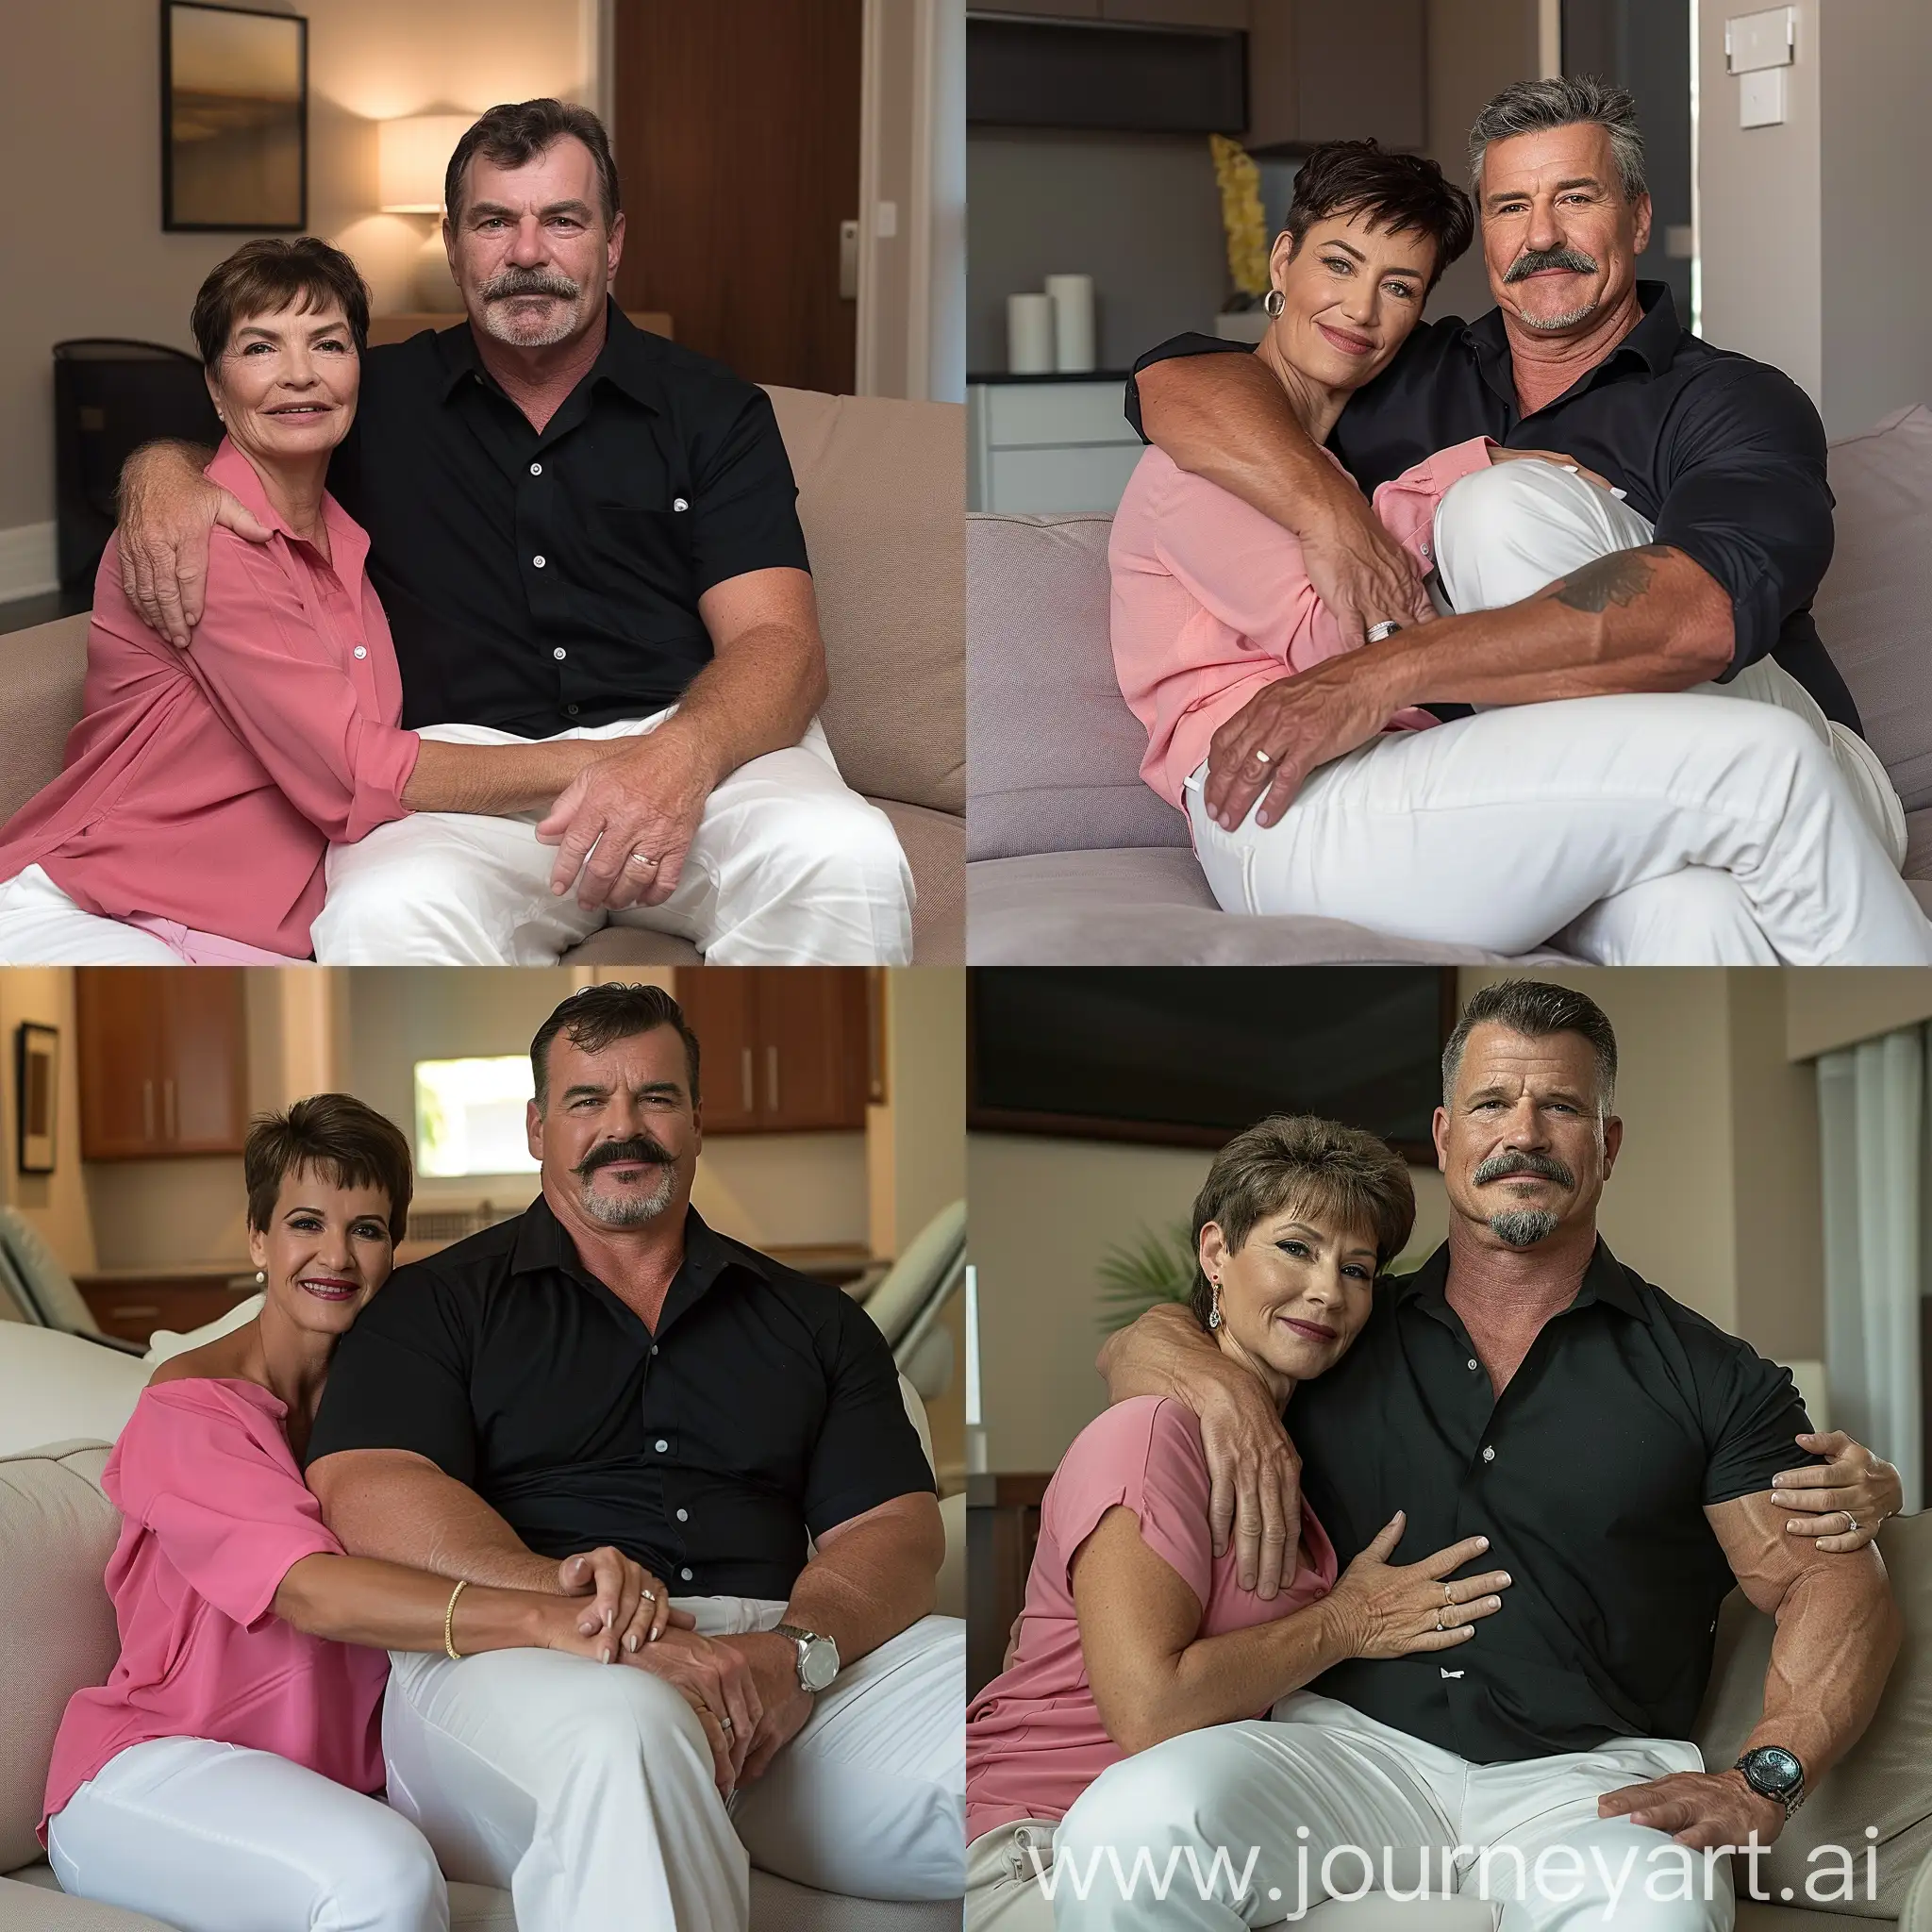 Burly mature good looking daddy man sitting on the couch with his wife on his side, with a mustashe, goatee mustache, muscular handsome man wearing a black dress shirt and white pants, white khaki pants, with his wife sitting on his side hugging his muscular arm, wife with short hair wearing a pink shirt, therapist room background